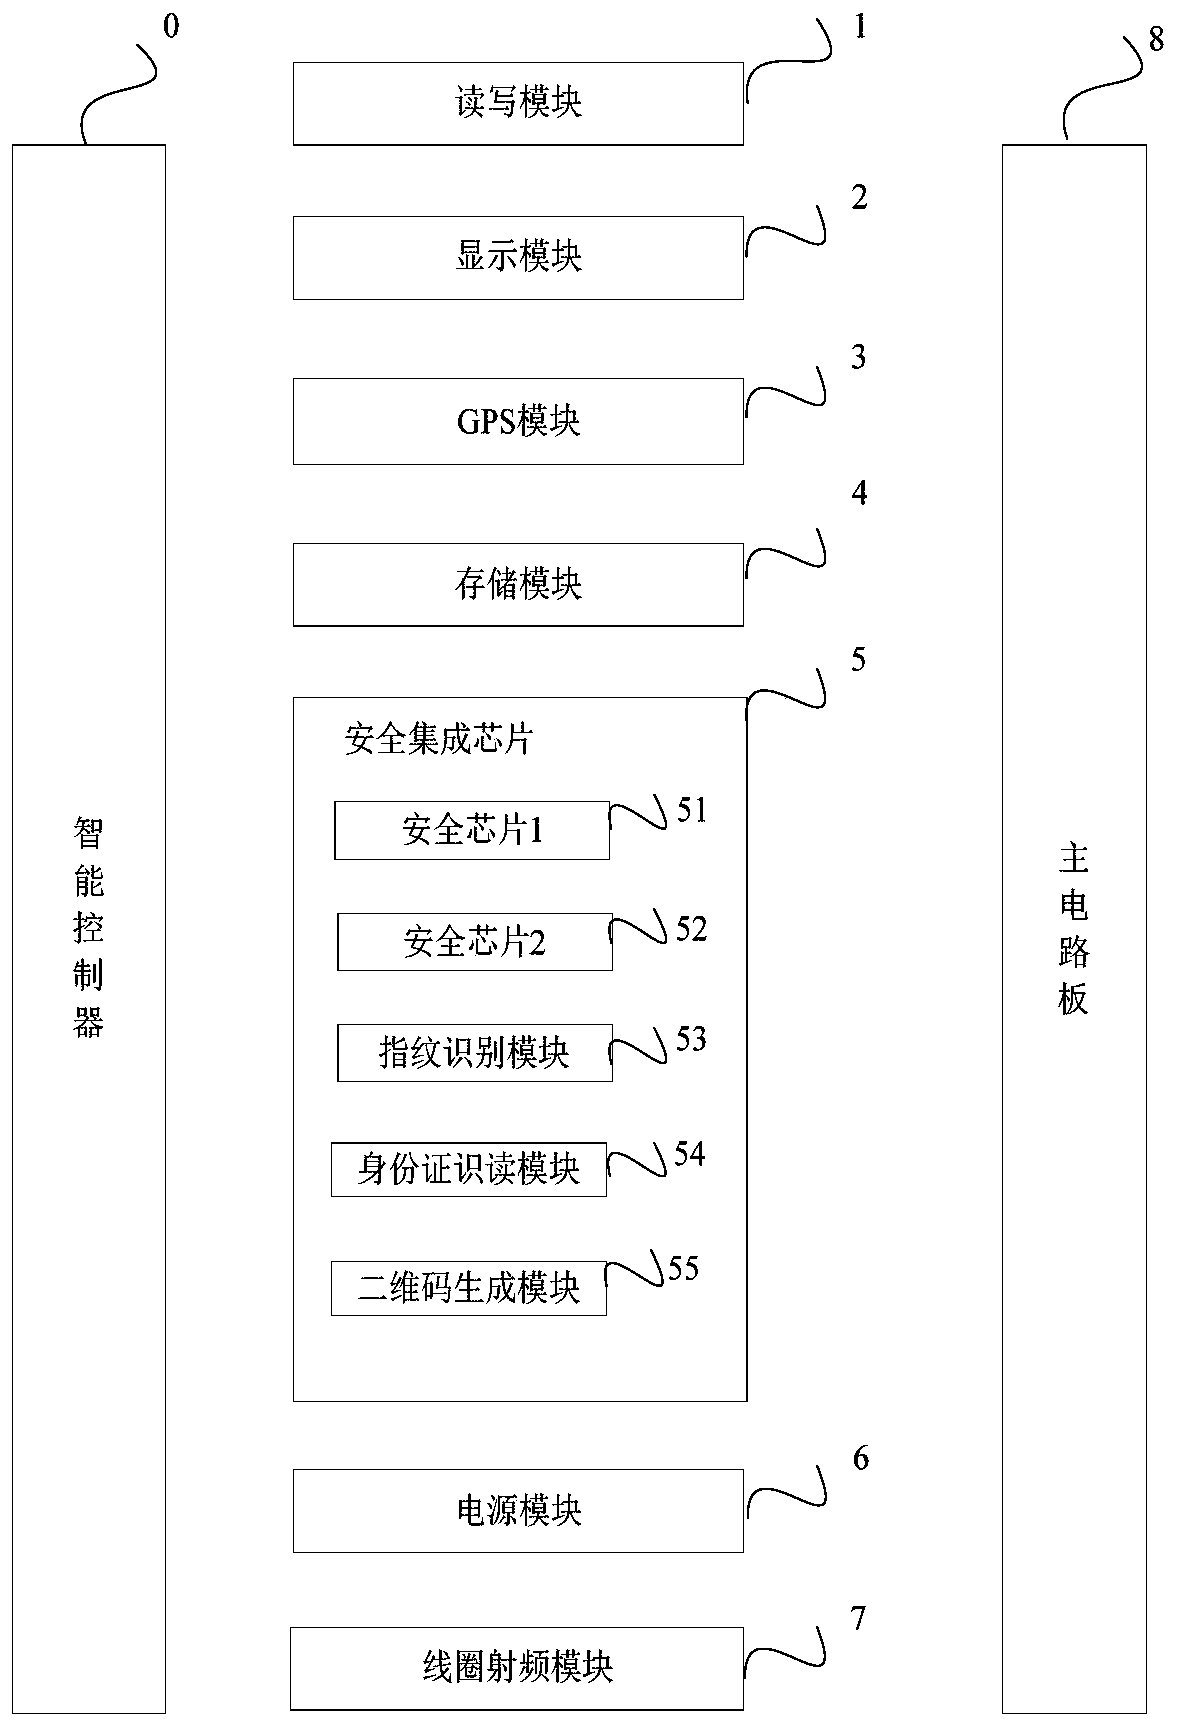 Multi-card-in-one system and implementation method